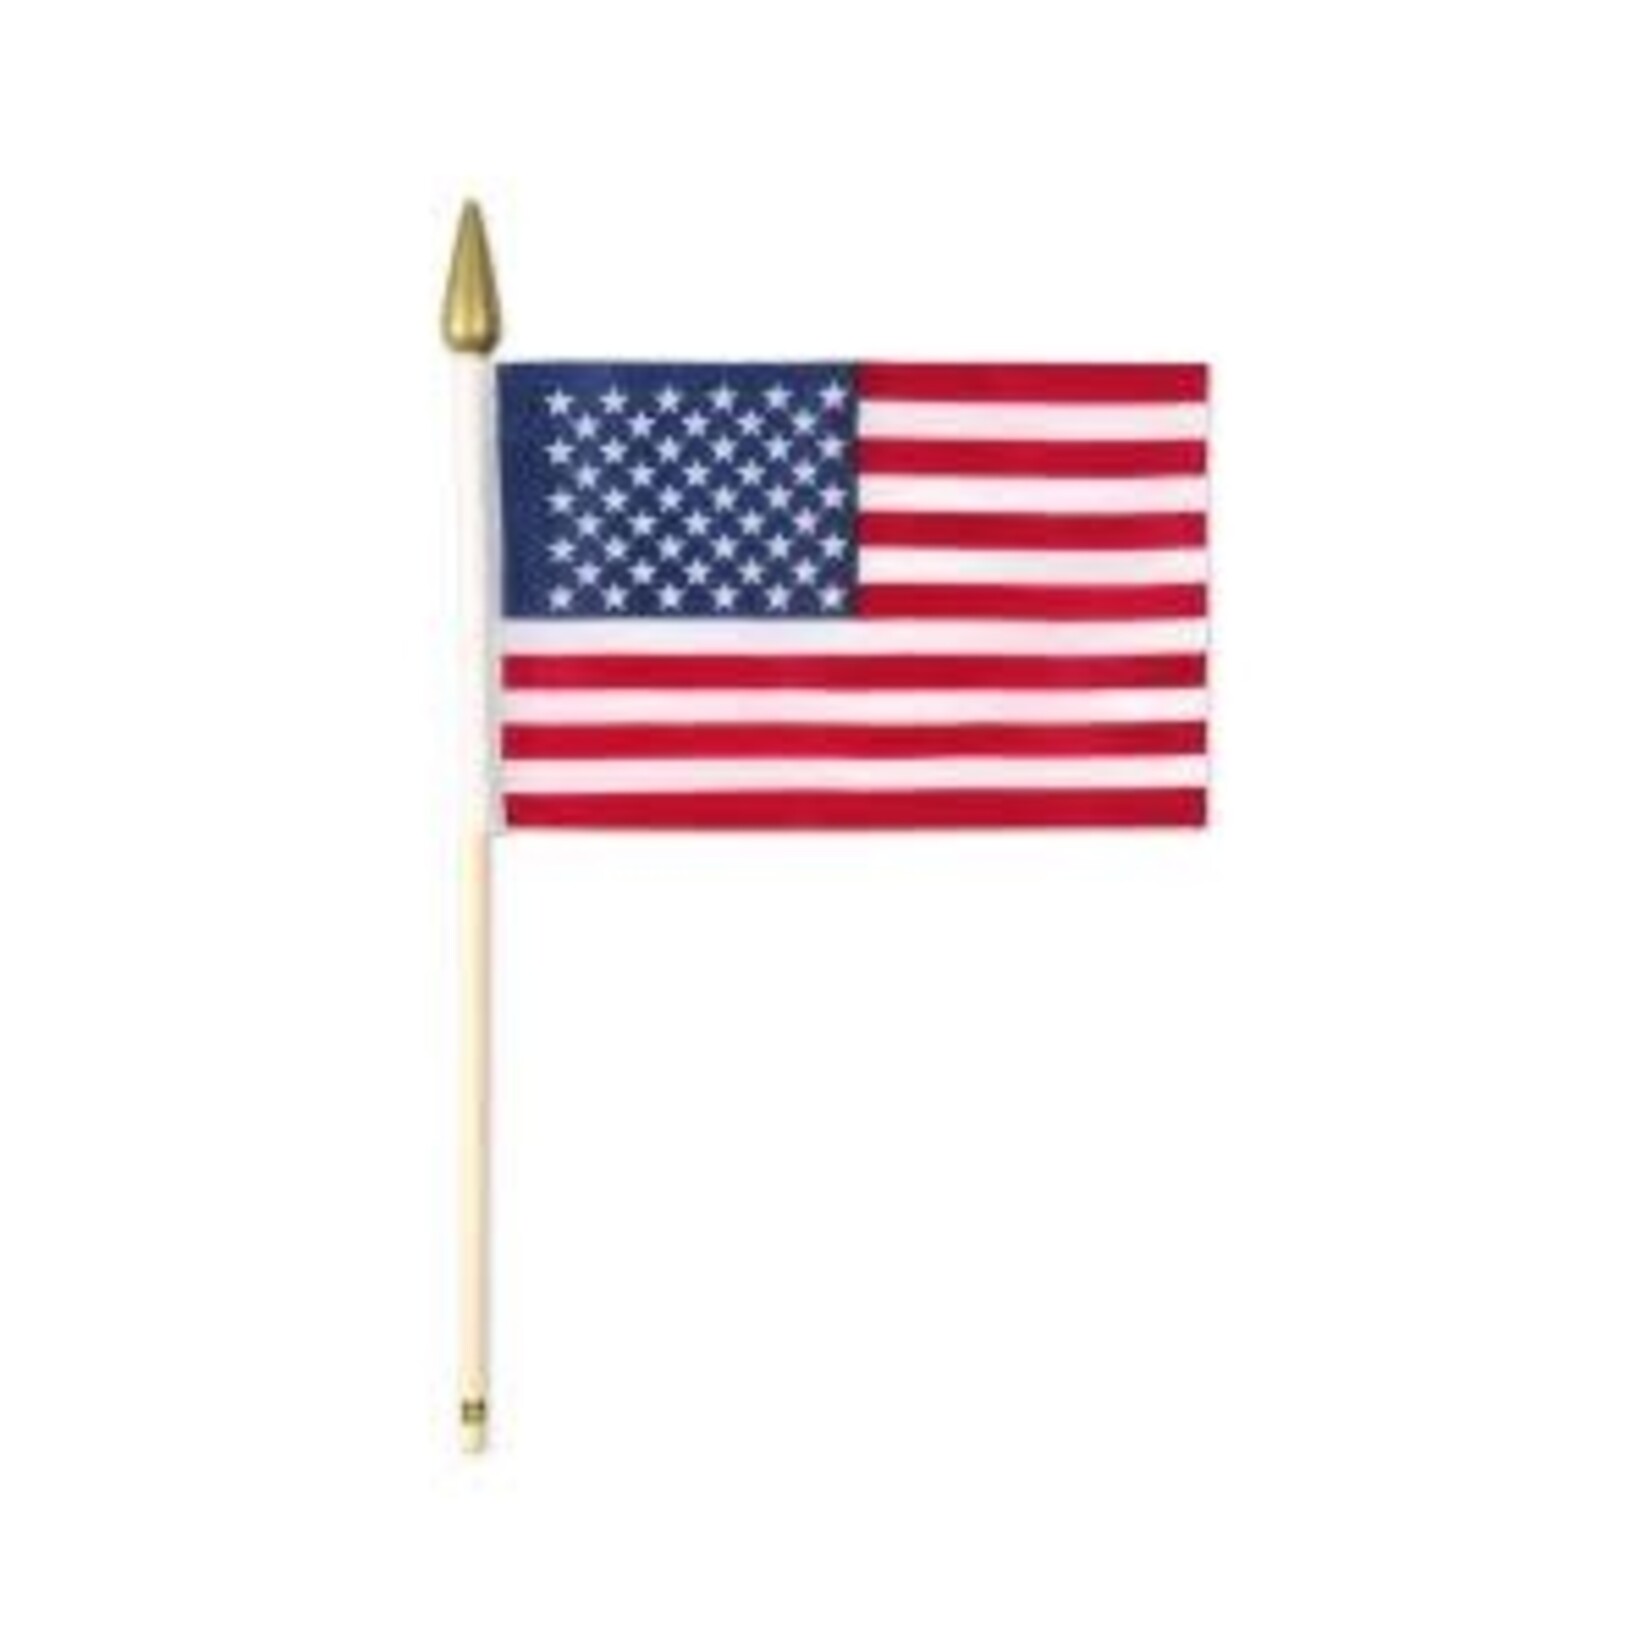 Beistle American Fabric Flags - 12ct. (4" x 6")